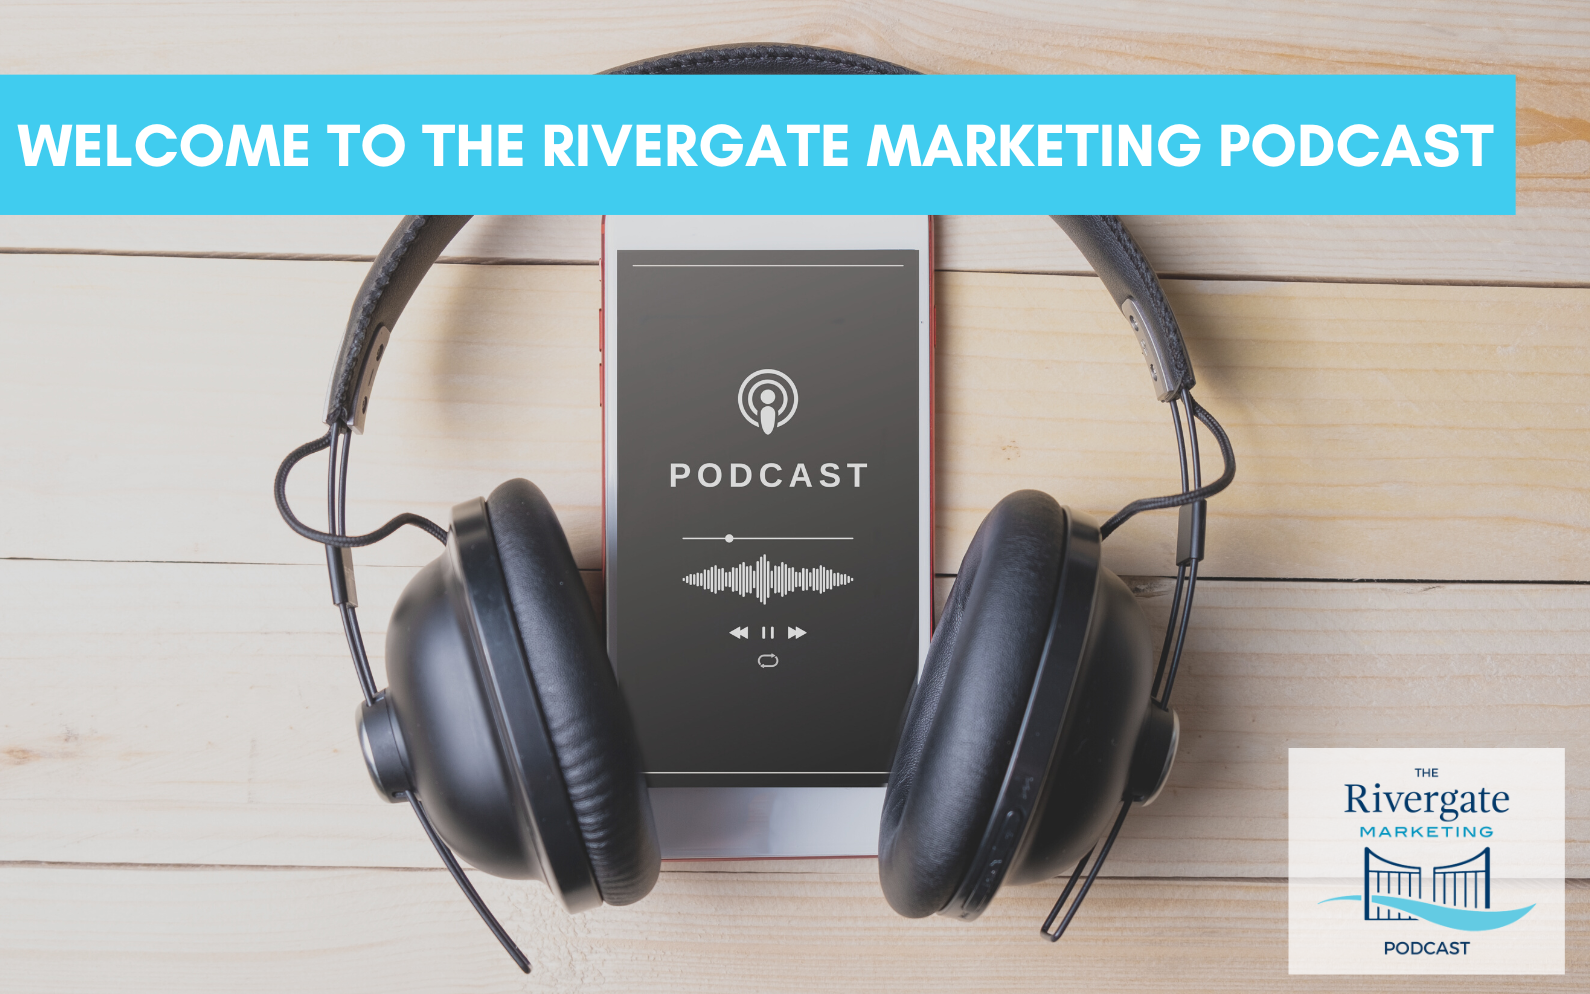 Welcome to the Rivergate Marketing podcast